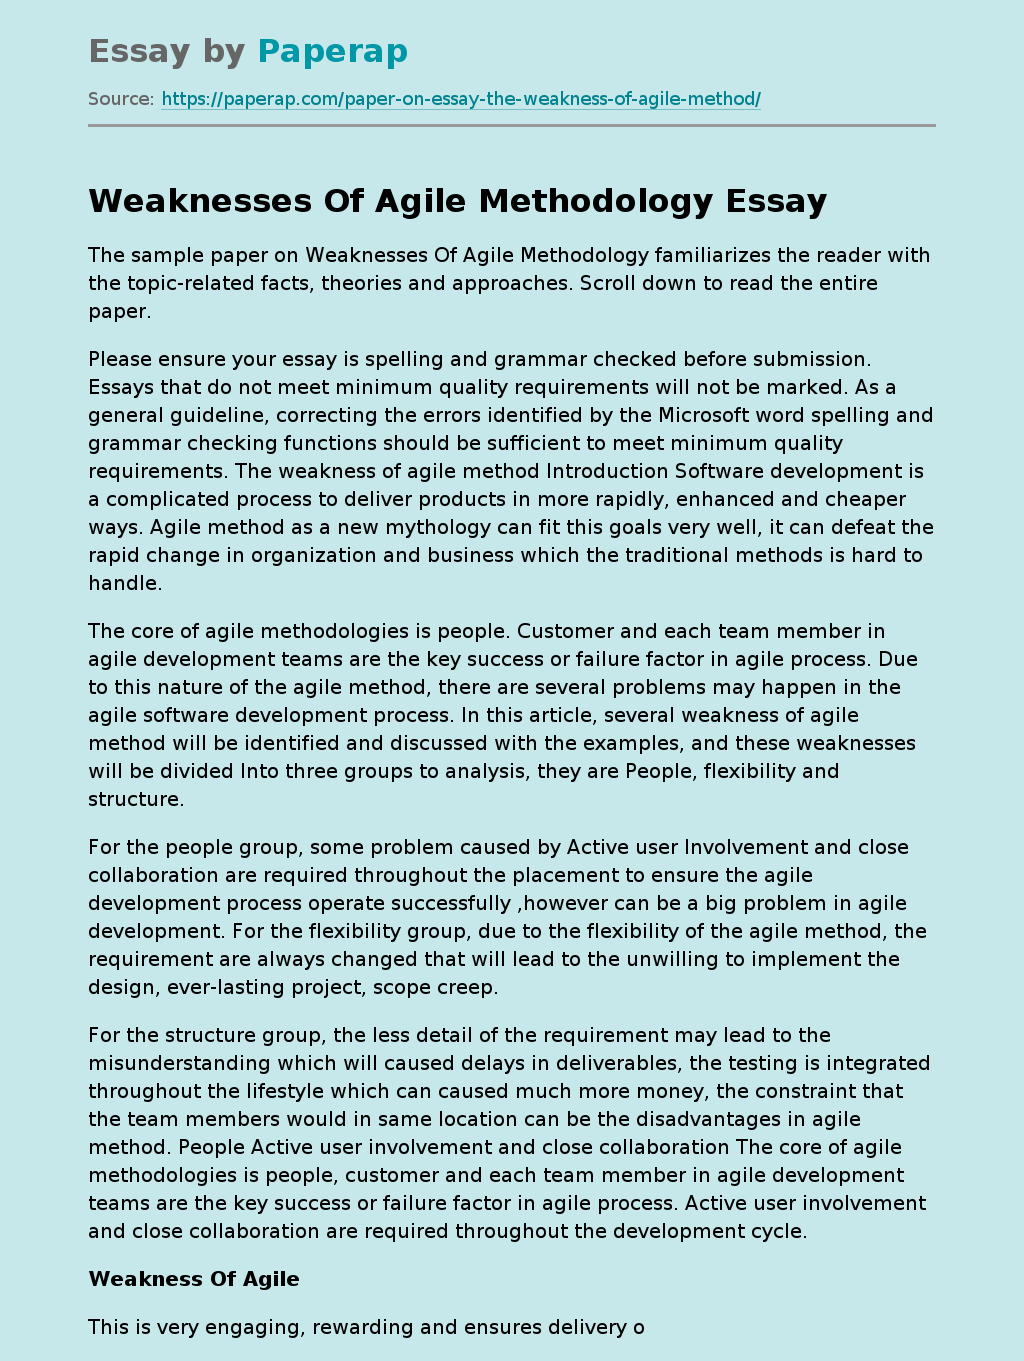 Weaknesses Of Agile Methodology: The Topic-related Facts